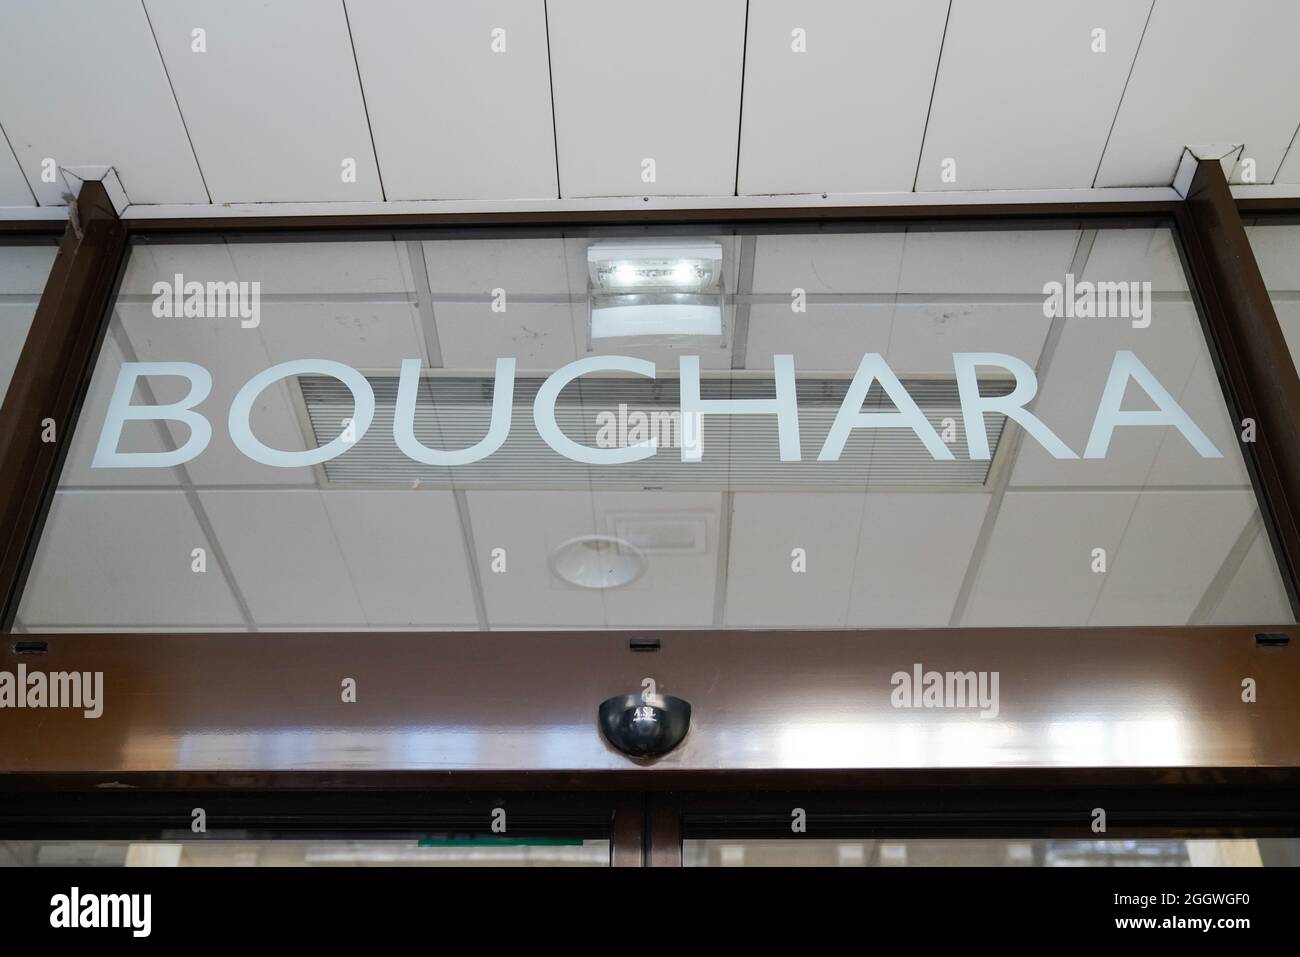 Bordeaux , Aquitaine France - 12 25 2020 : Bouchara logo brand and text  sign of store company manufacturing of home textiles decoration Stock Photo  - Alamy